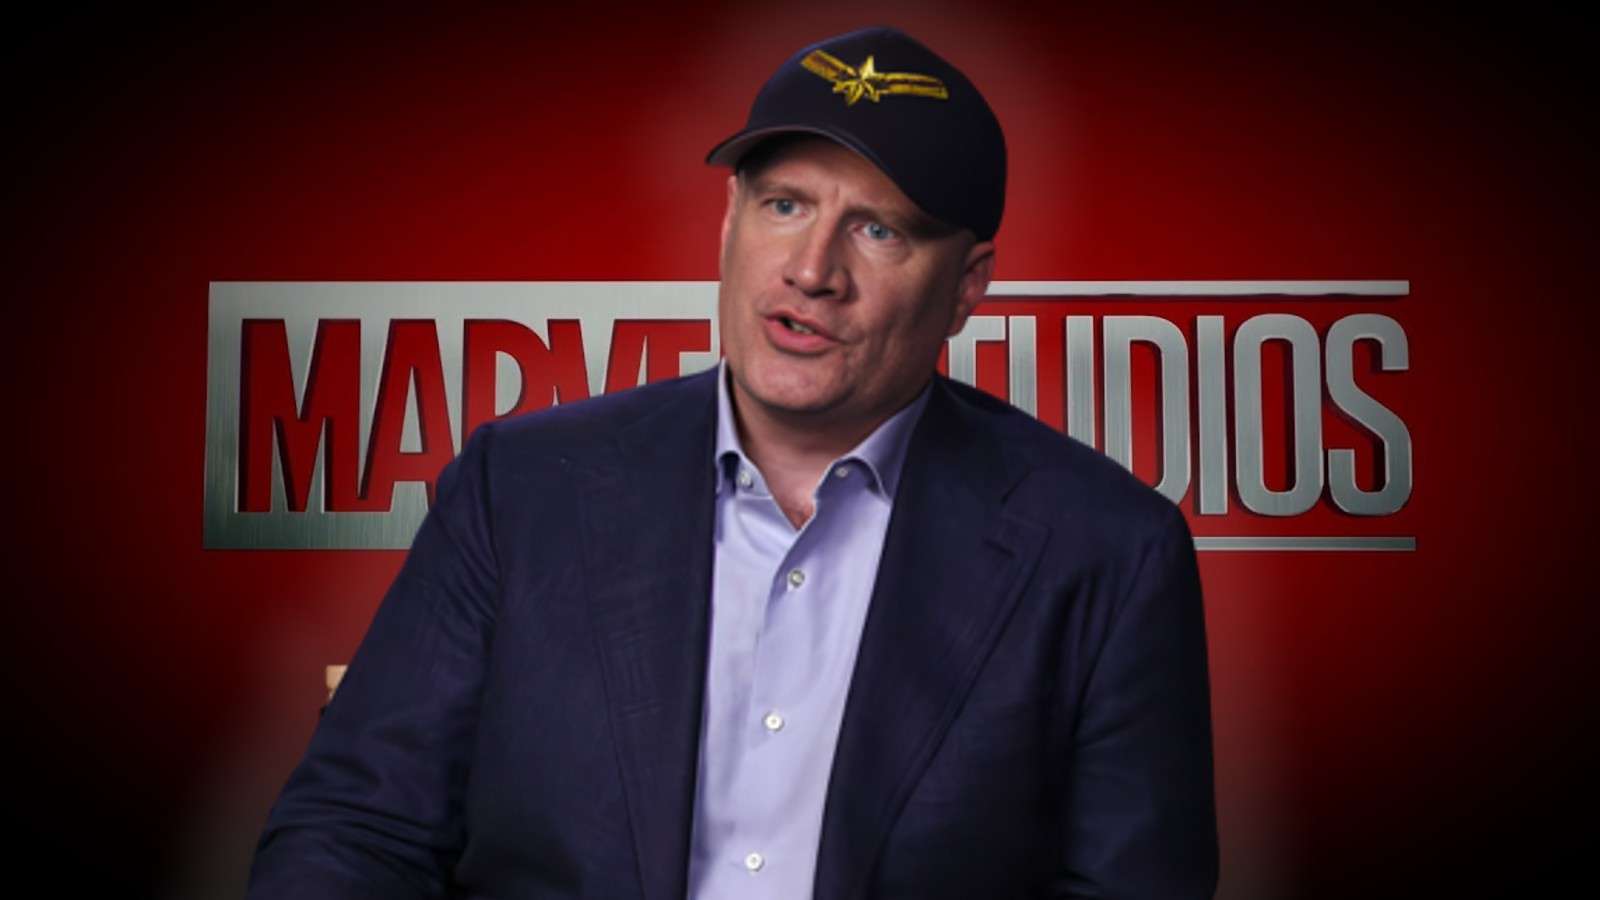 Kevin Feige in front of the MCU Marvel logo